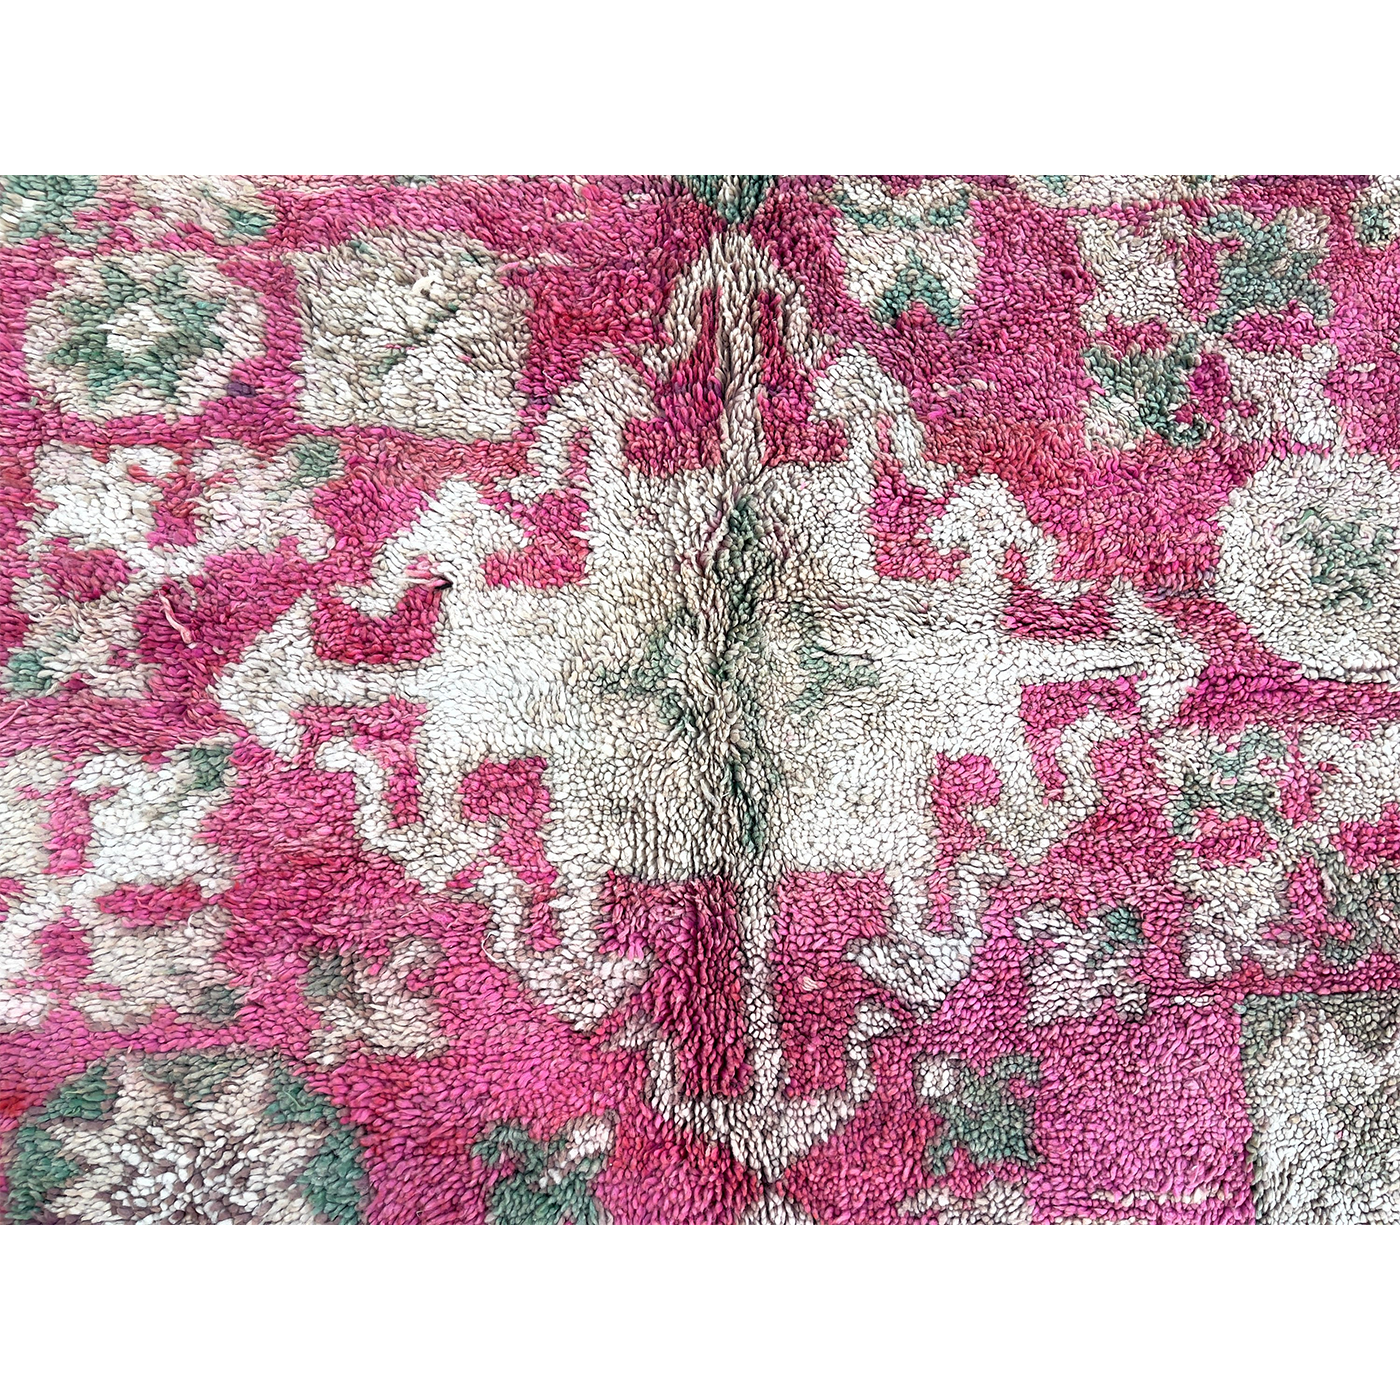 Moroccan Rugs For Sale